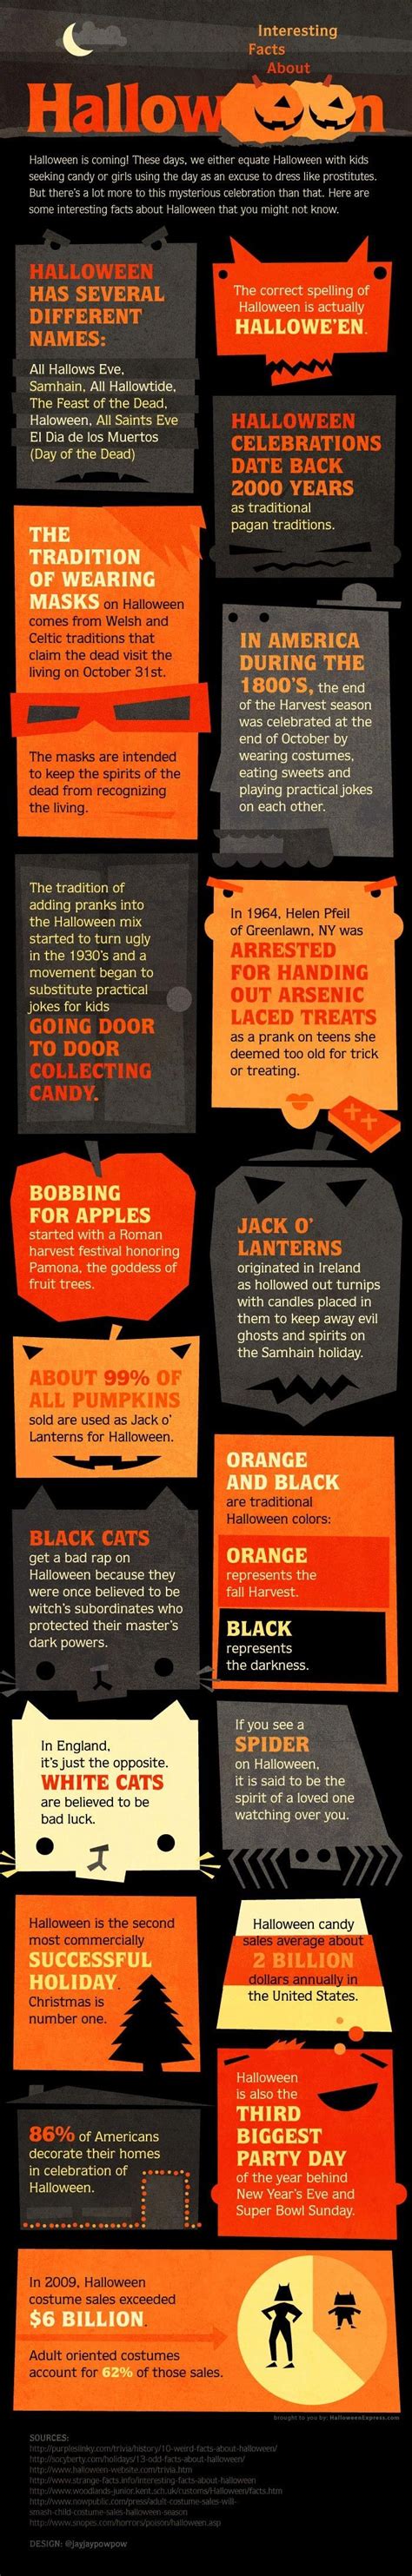 Interesting Halloween Facts Pictures, Photos, and Images for Facebook